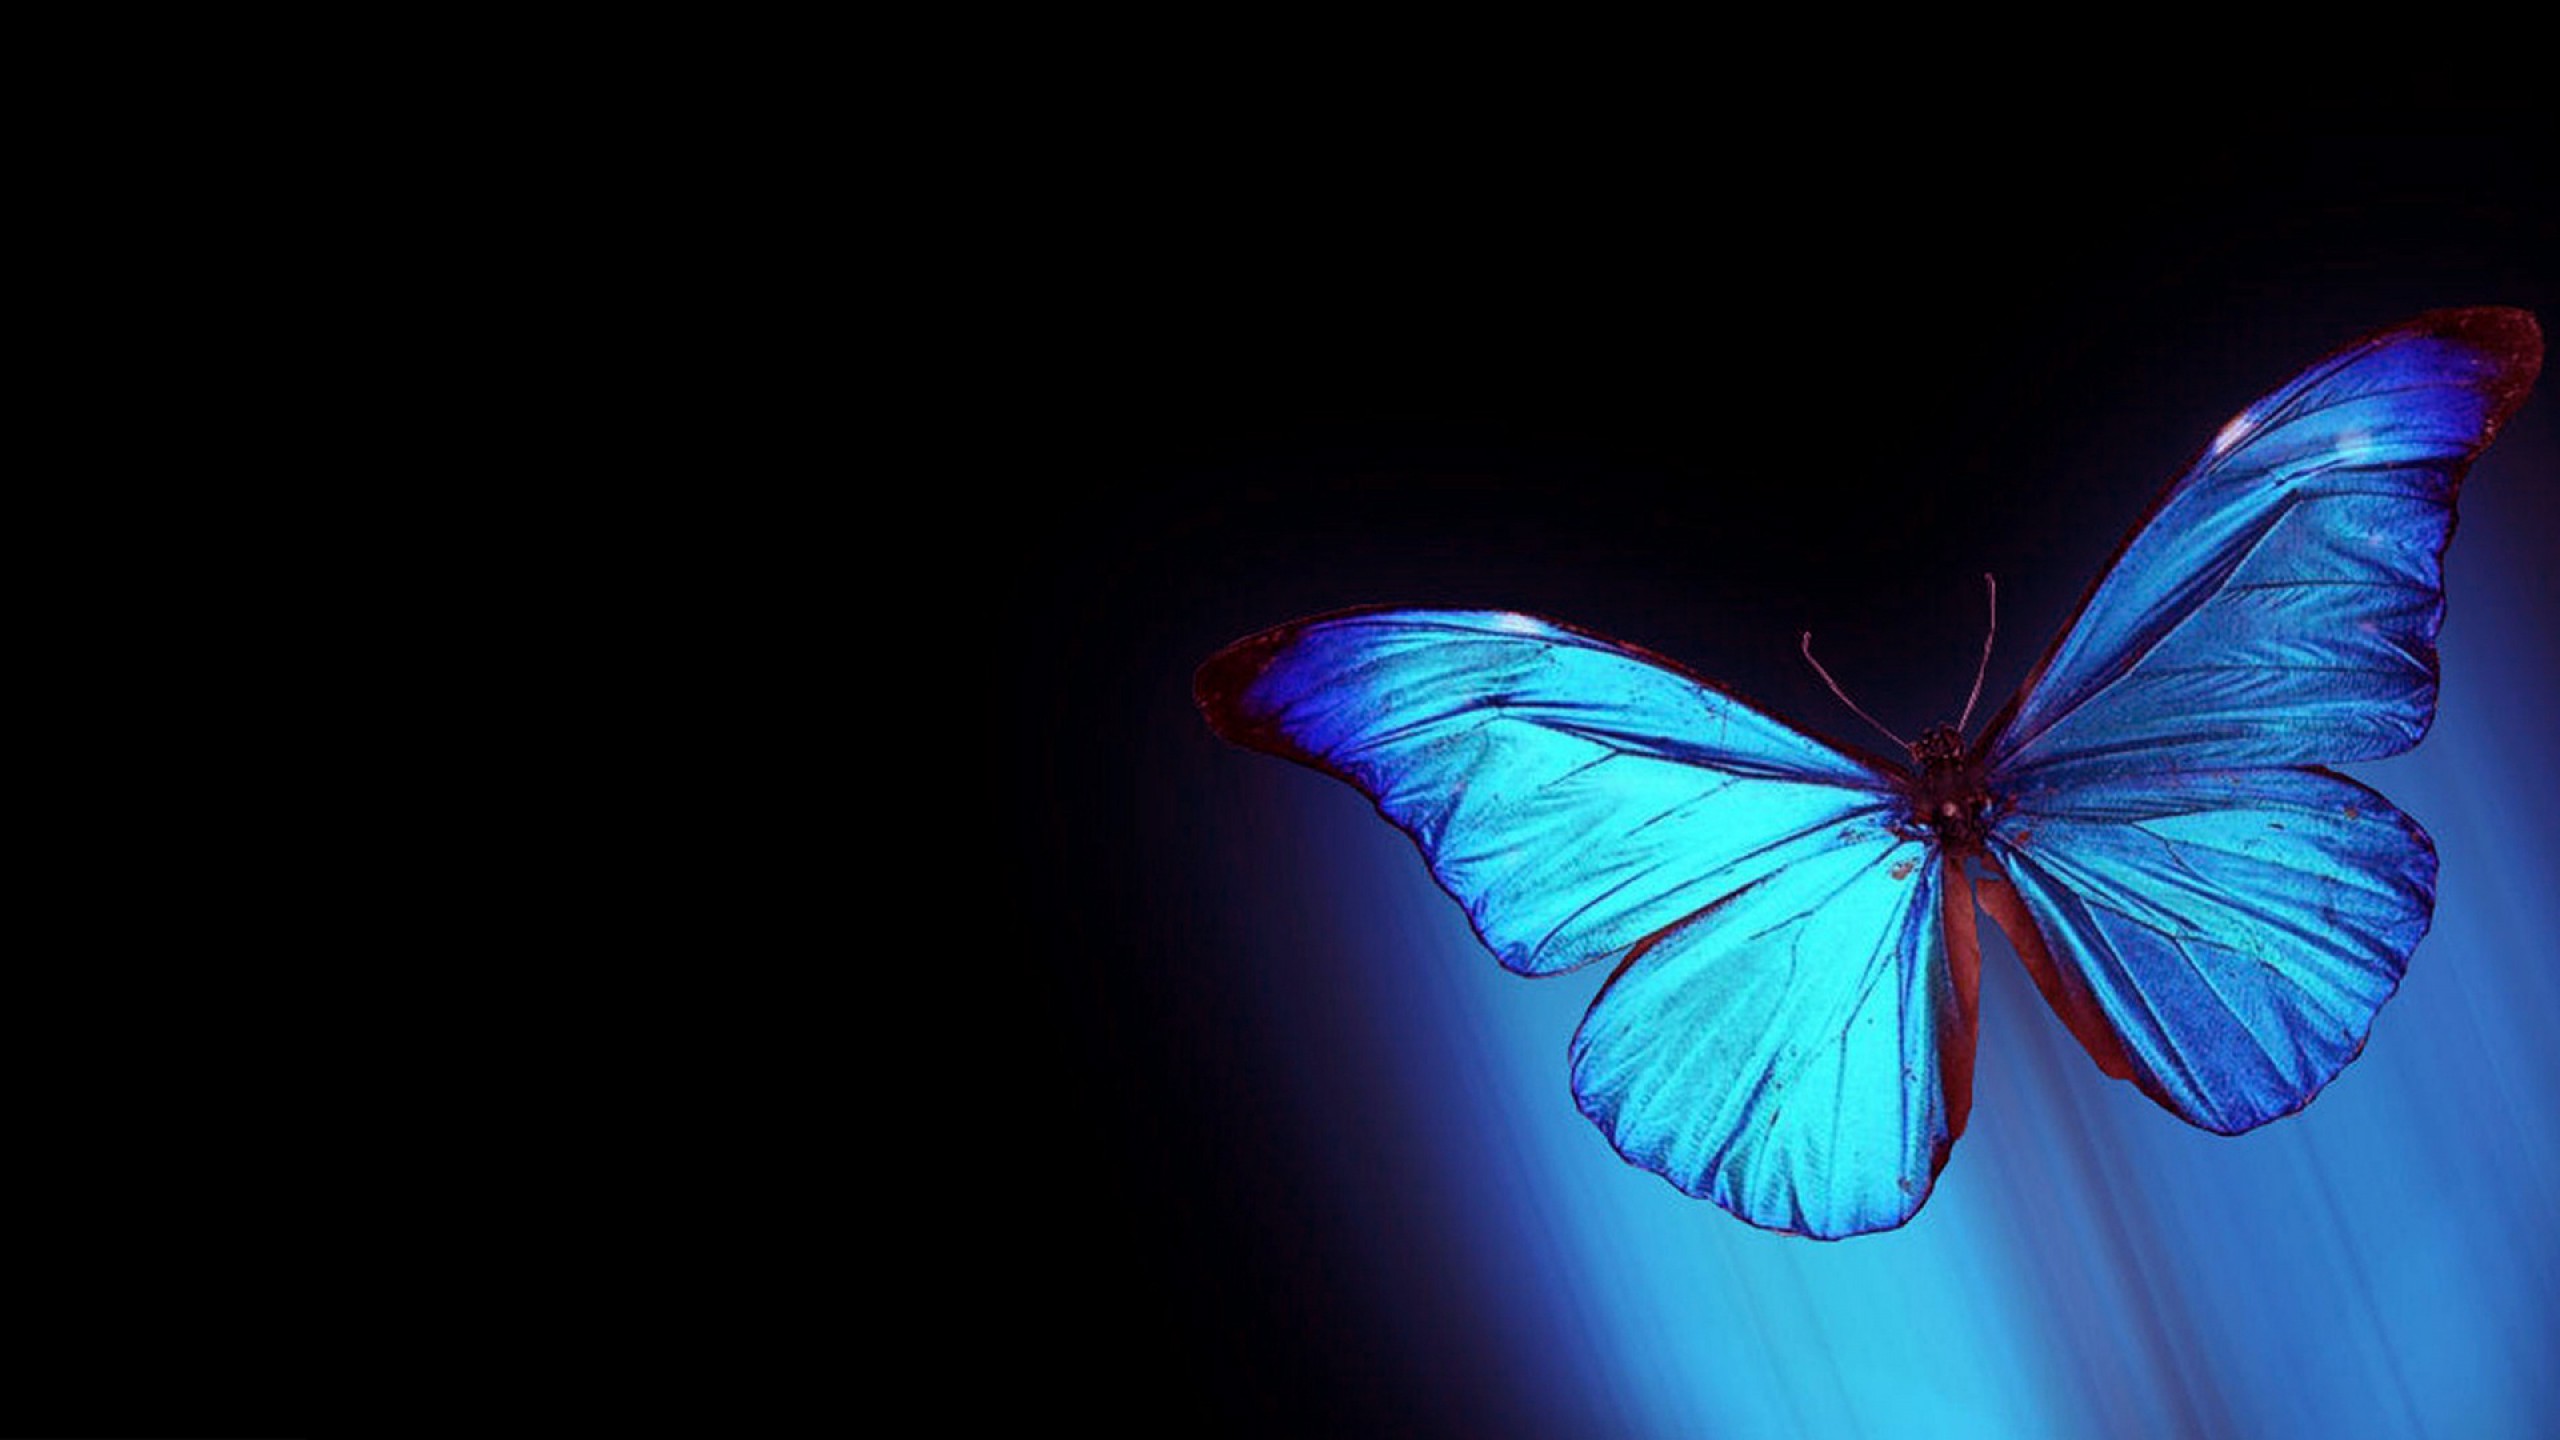 Black And Blue Butterfly Wallpaper Id Frenzia